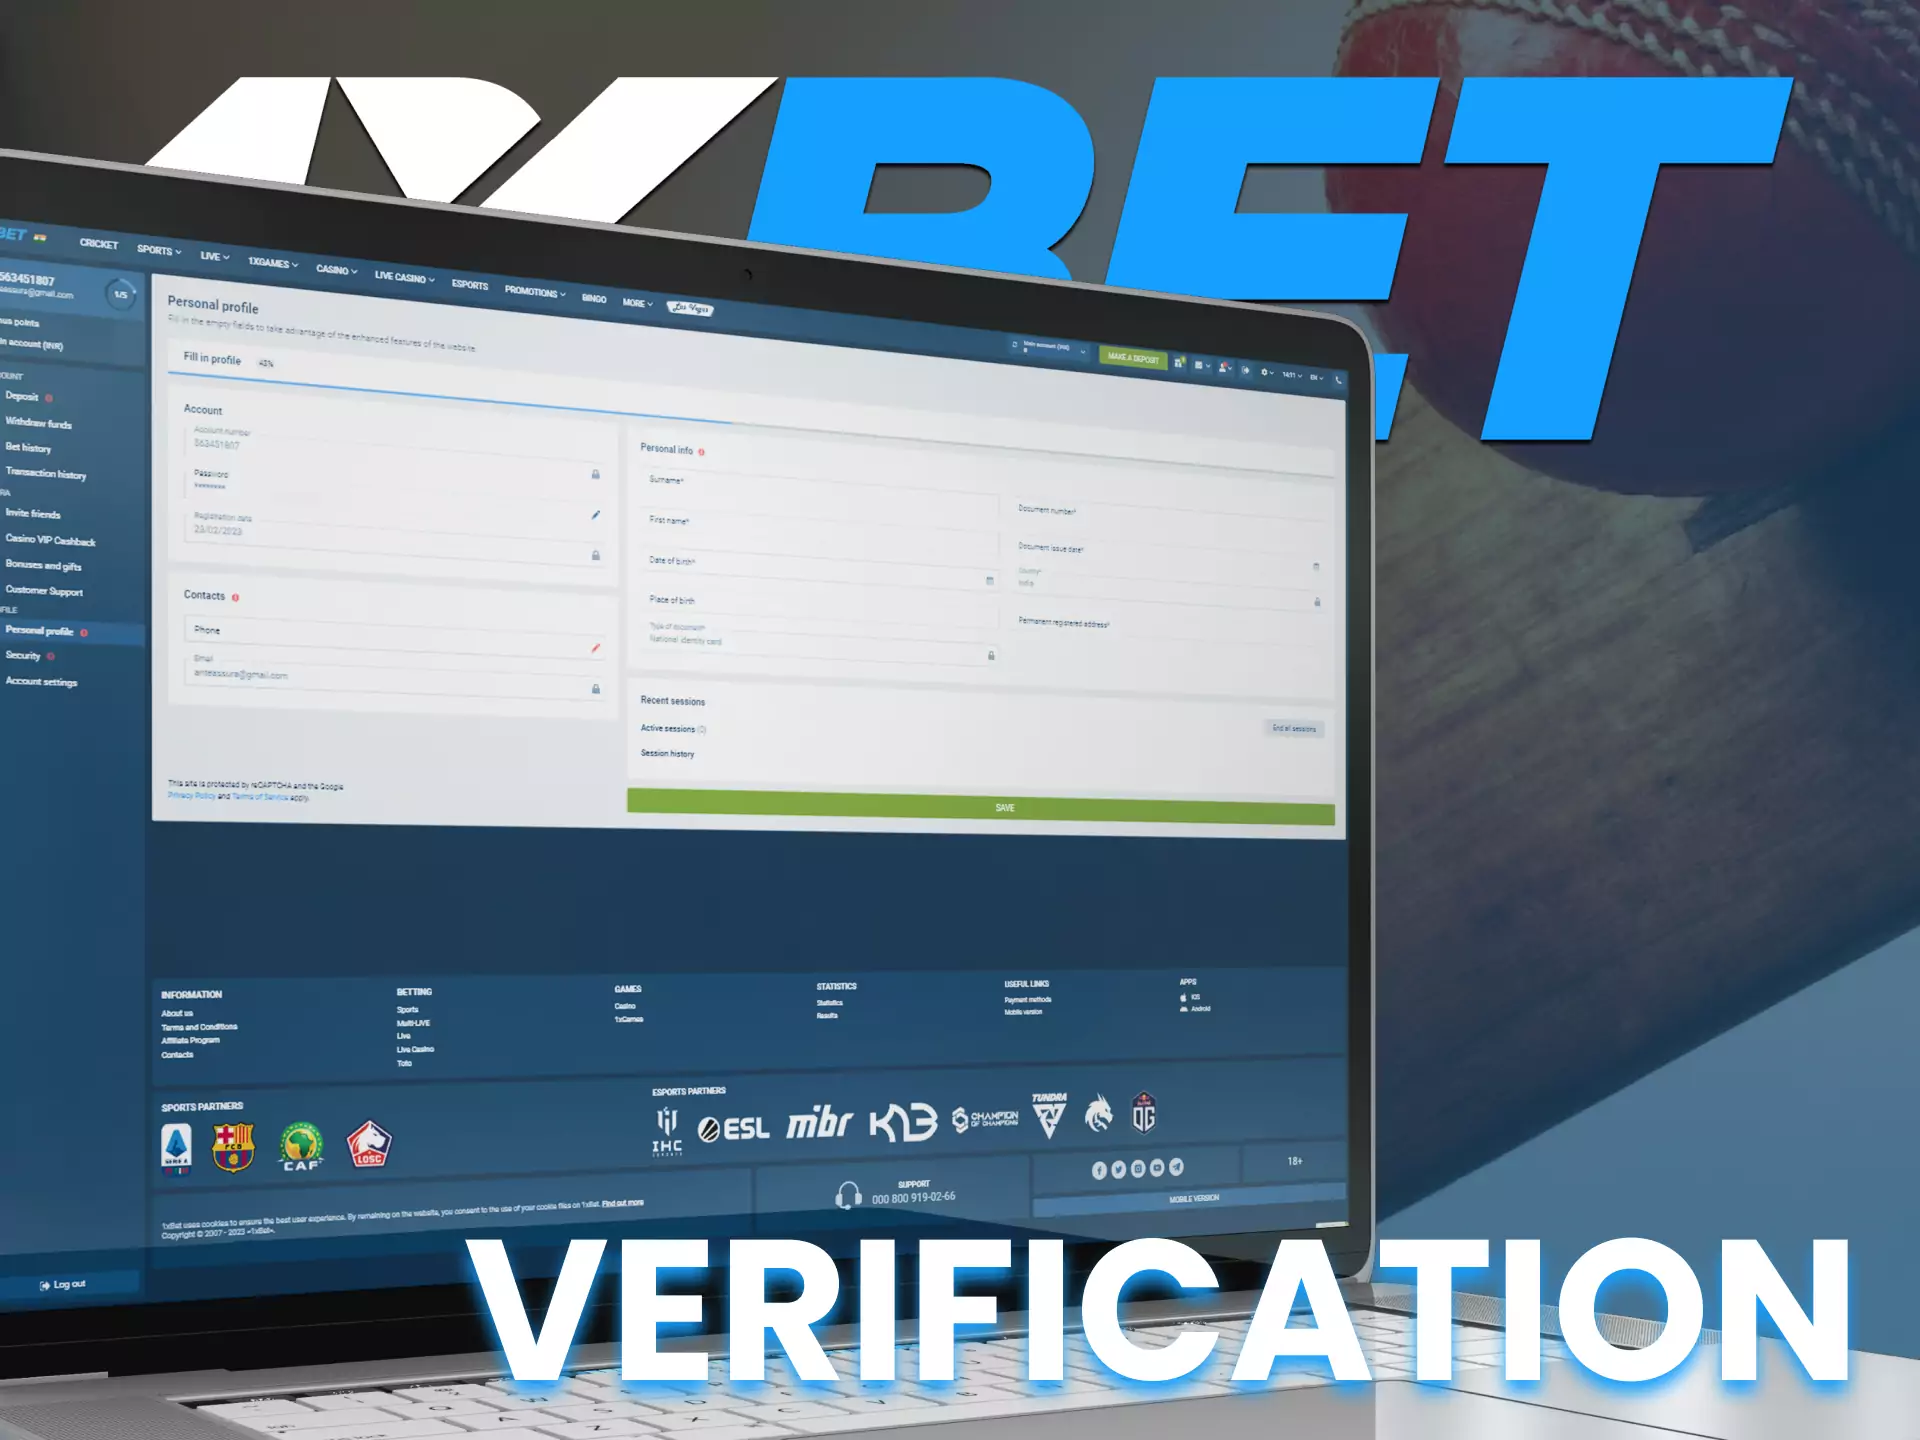 At 1XBET you need a simple verification to use all the features.